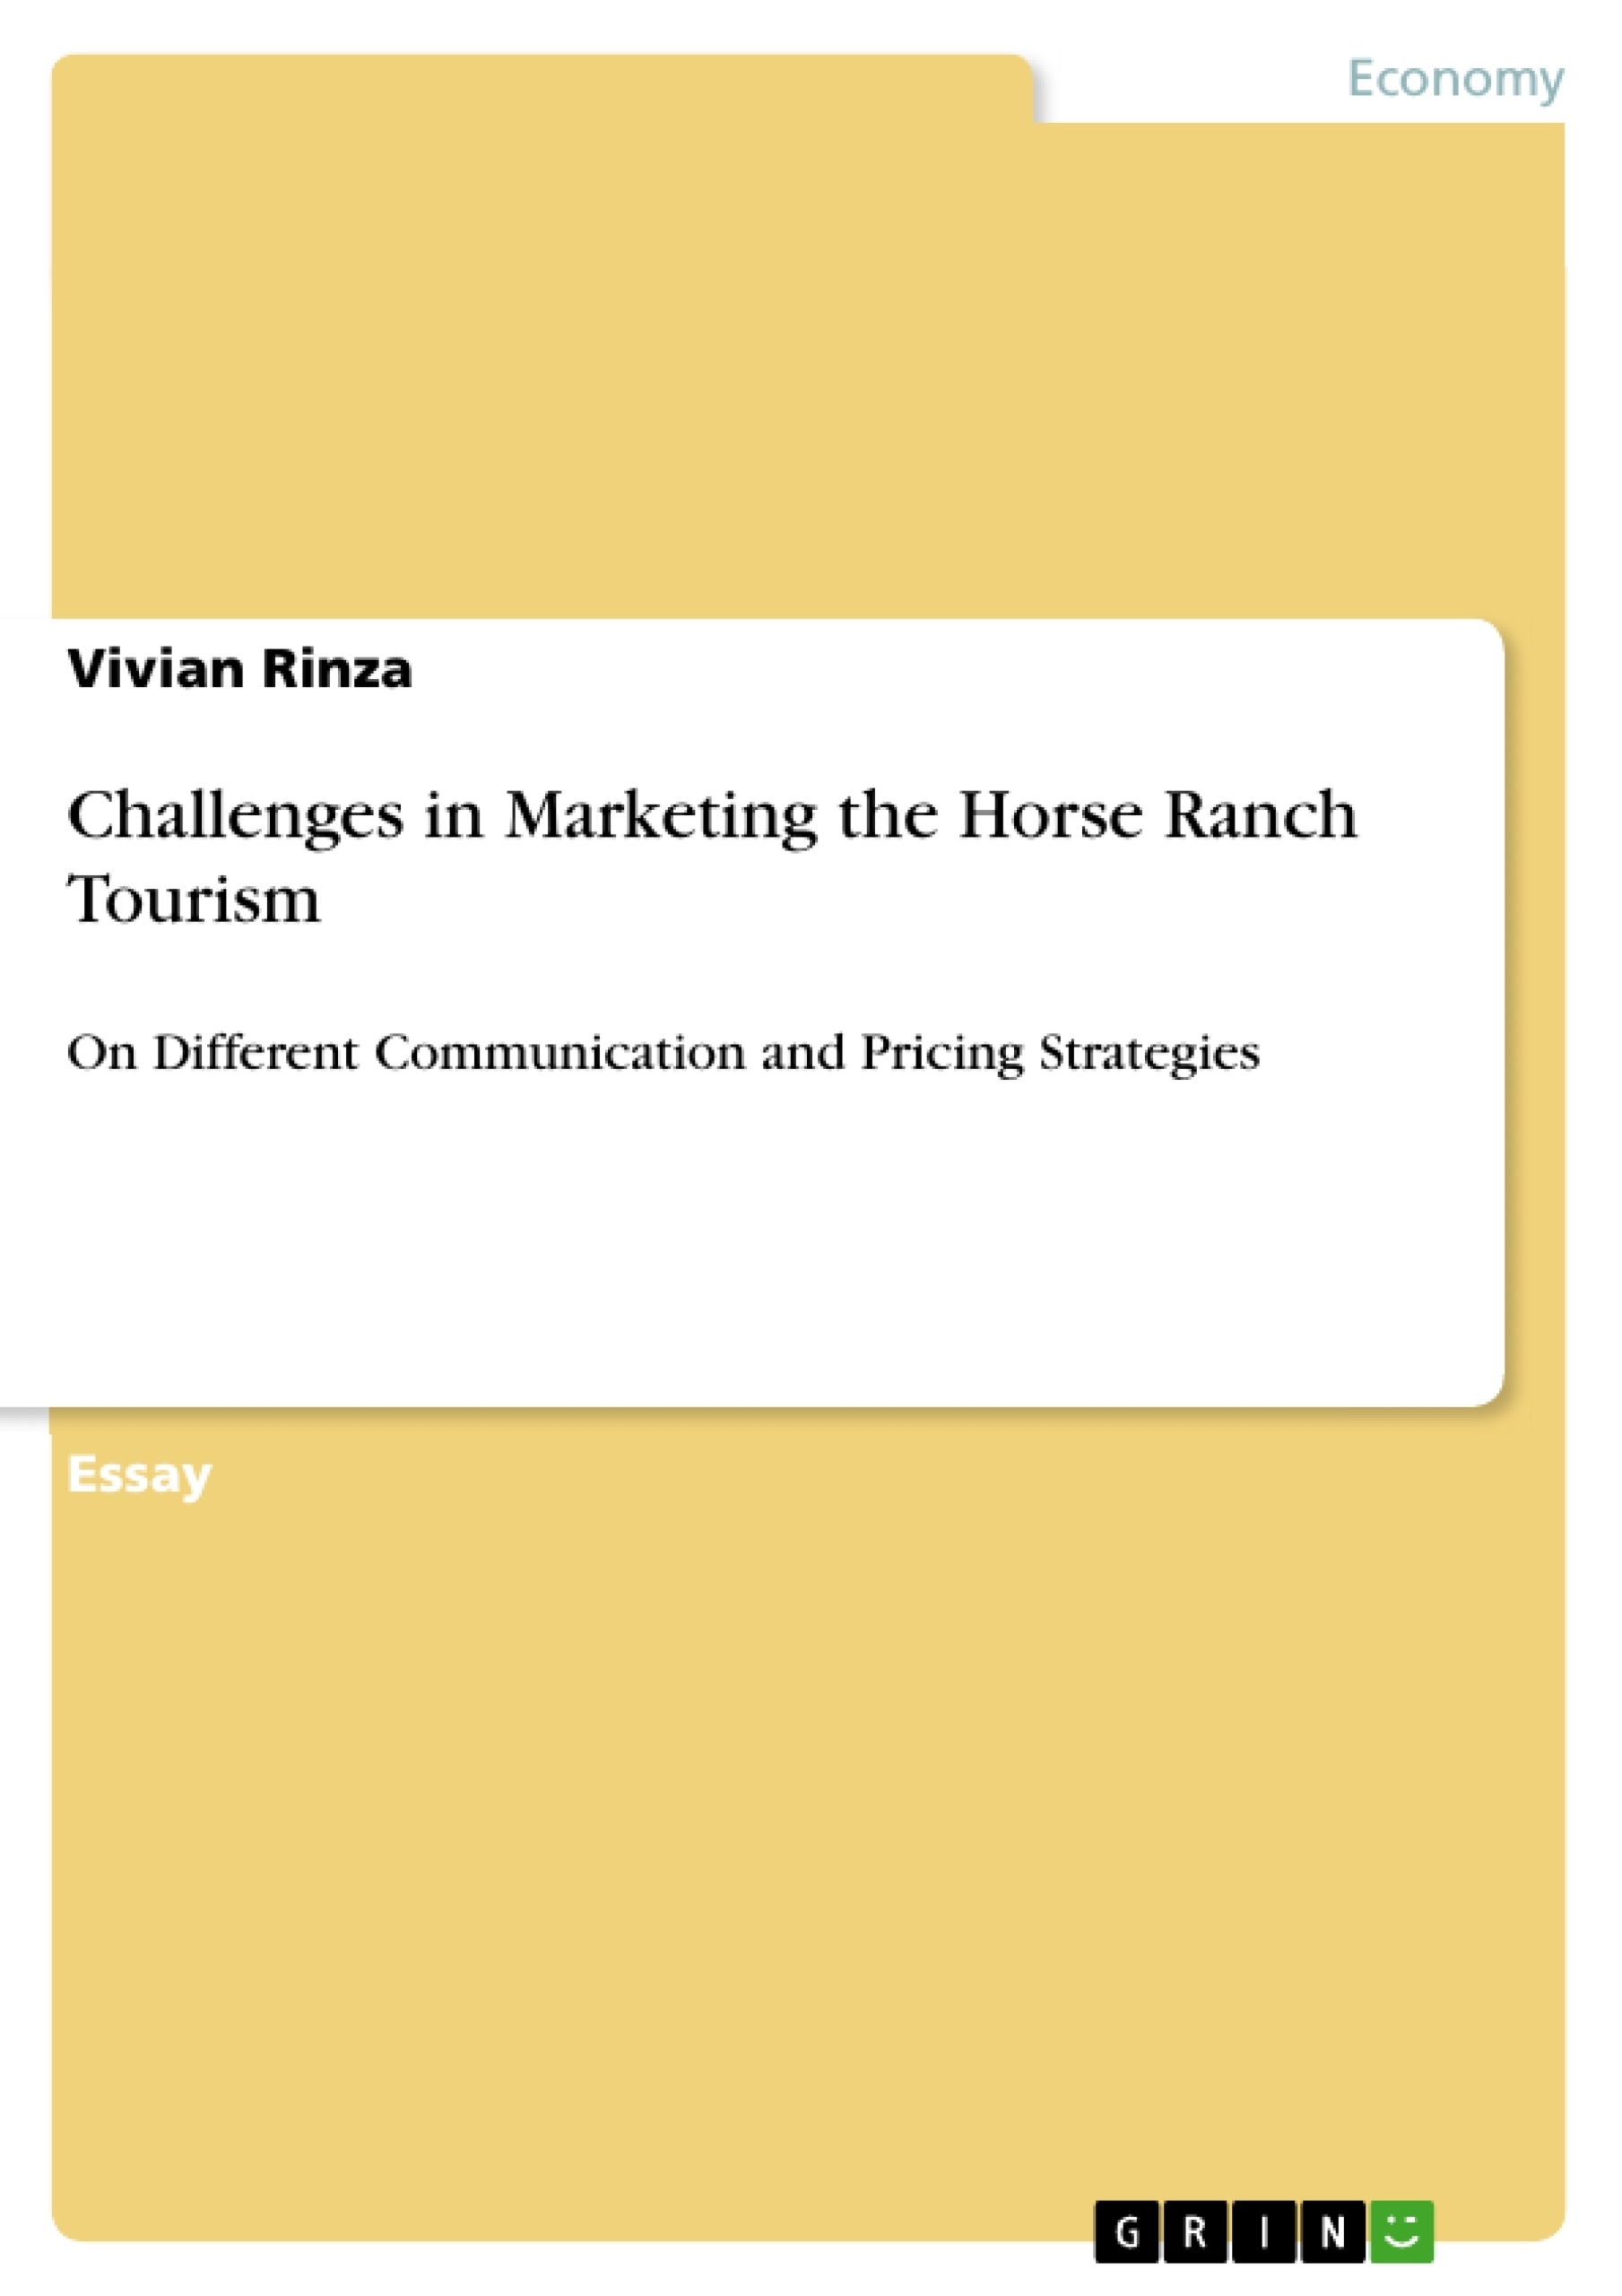 Title: Challenges in Marketing the Horse Ranch Tourism